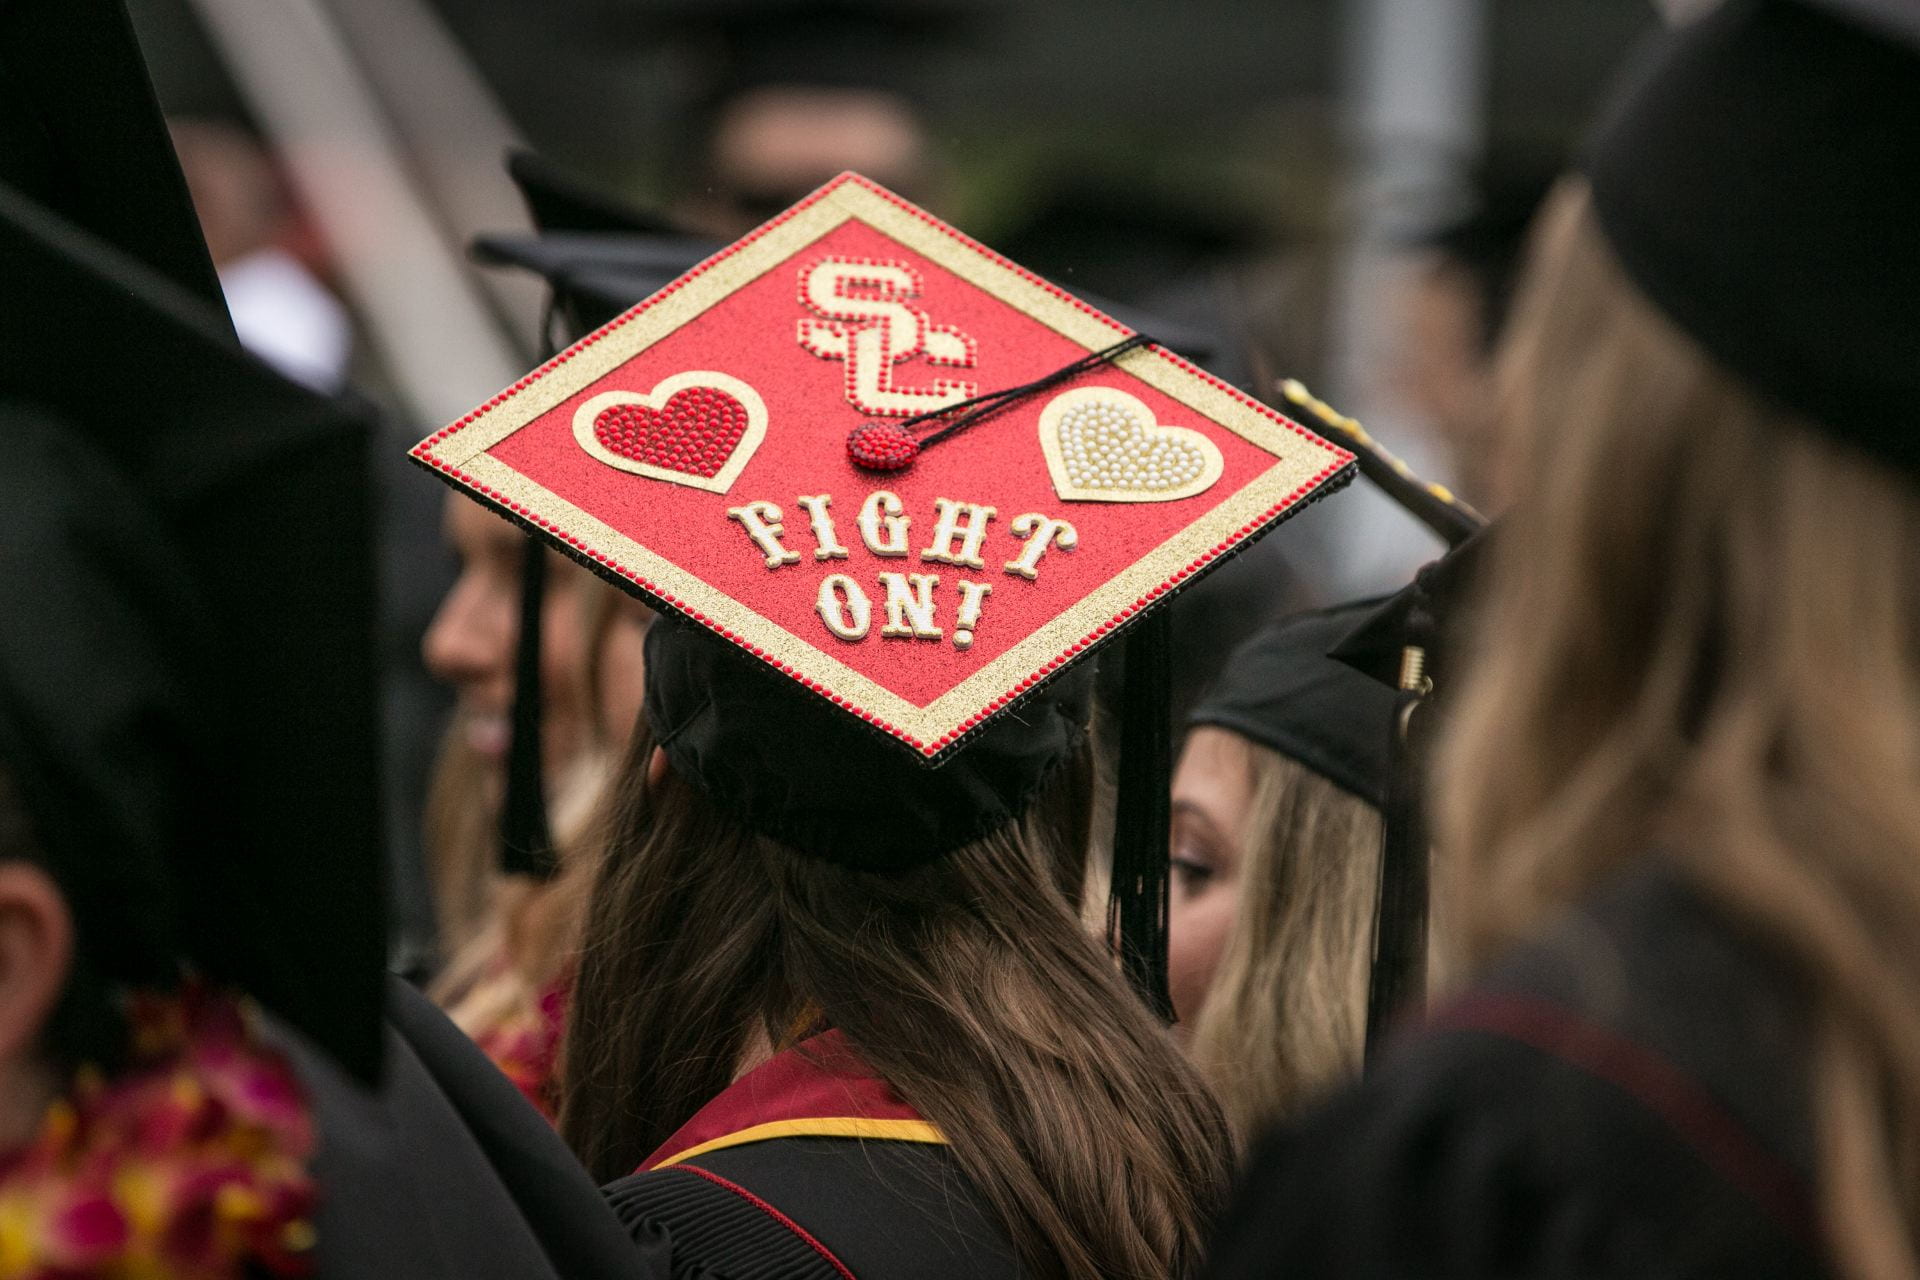 This update provides information about our upcoming 2024 commencement events. To ensure we host commencement activities and celebrate our graduates sa